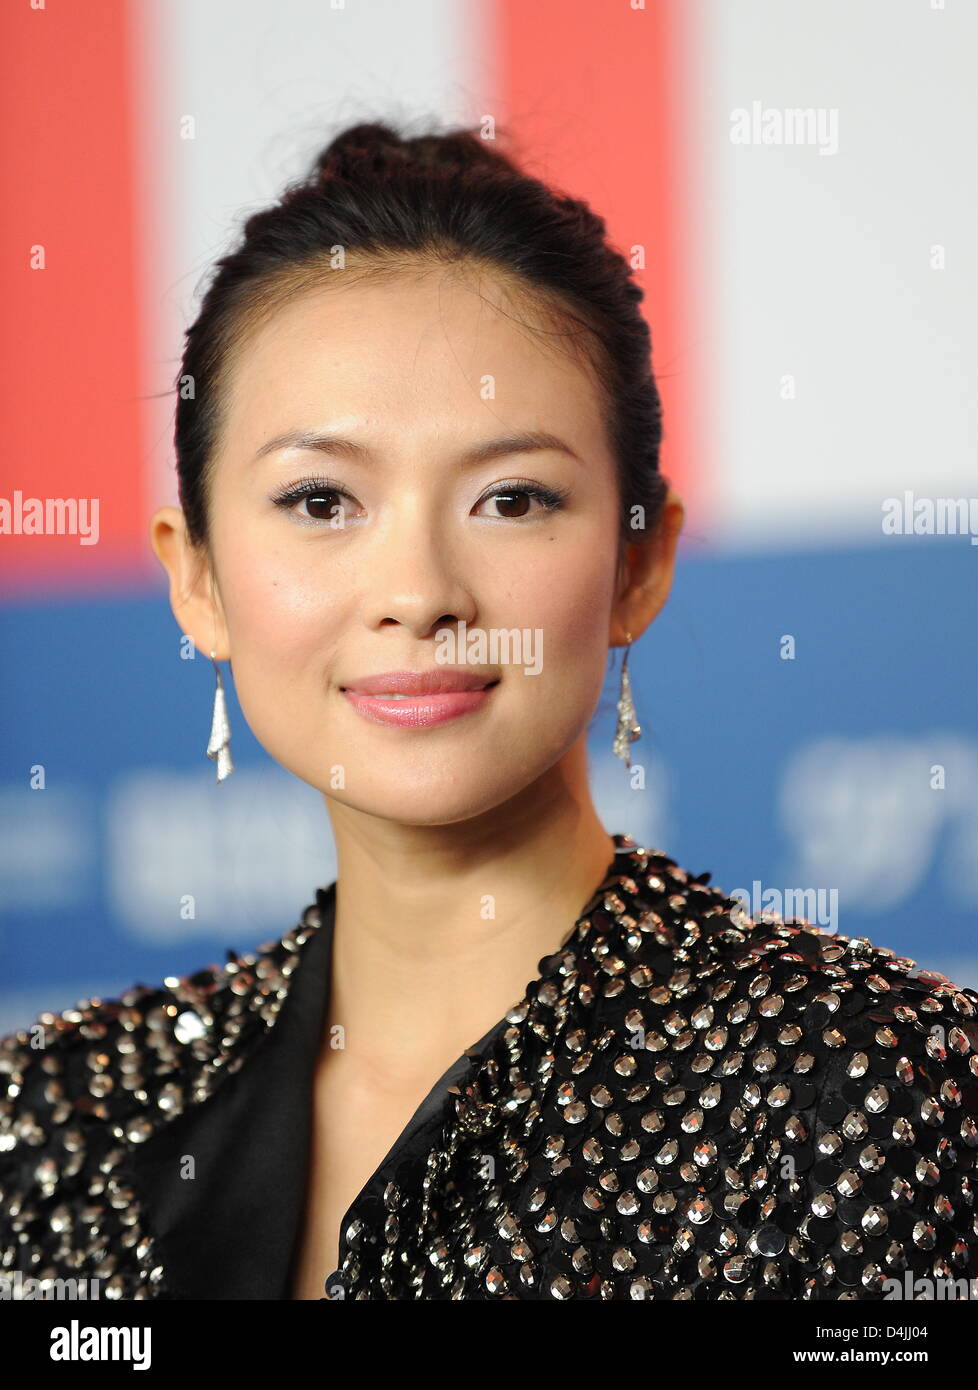 Chinese actress Zhang Ziyi attends the press conference on the film ?Forever Enthralled? at the 59th Berlin International Film Festival in Berlin, Germany, 10 February 2009. The film is among the 18 films competing for the Silver and Golden Bear awards at the 59th Berlinale. Winners will be announced on 14 February. Photo: Joerg Carstensen Stock Photo